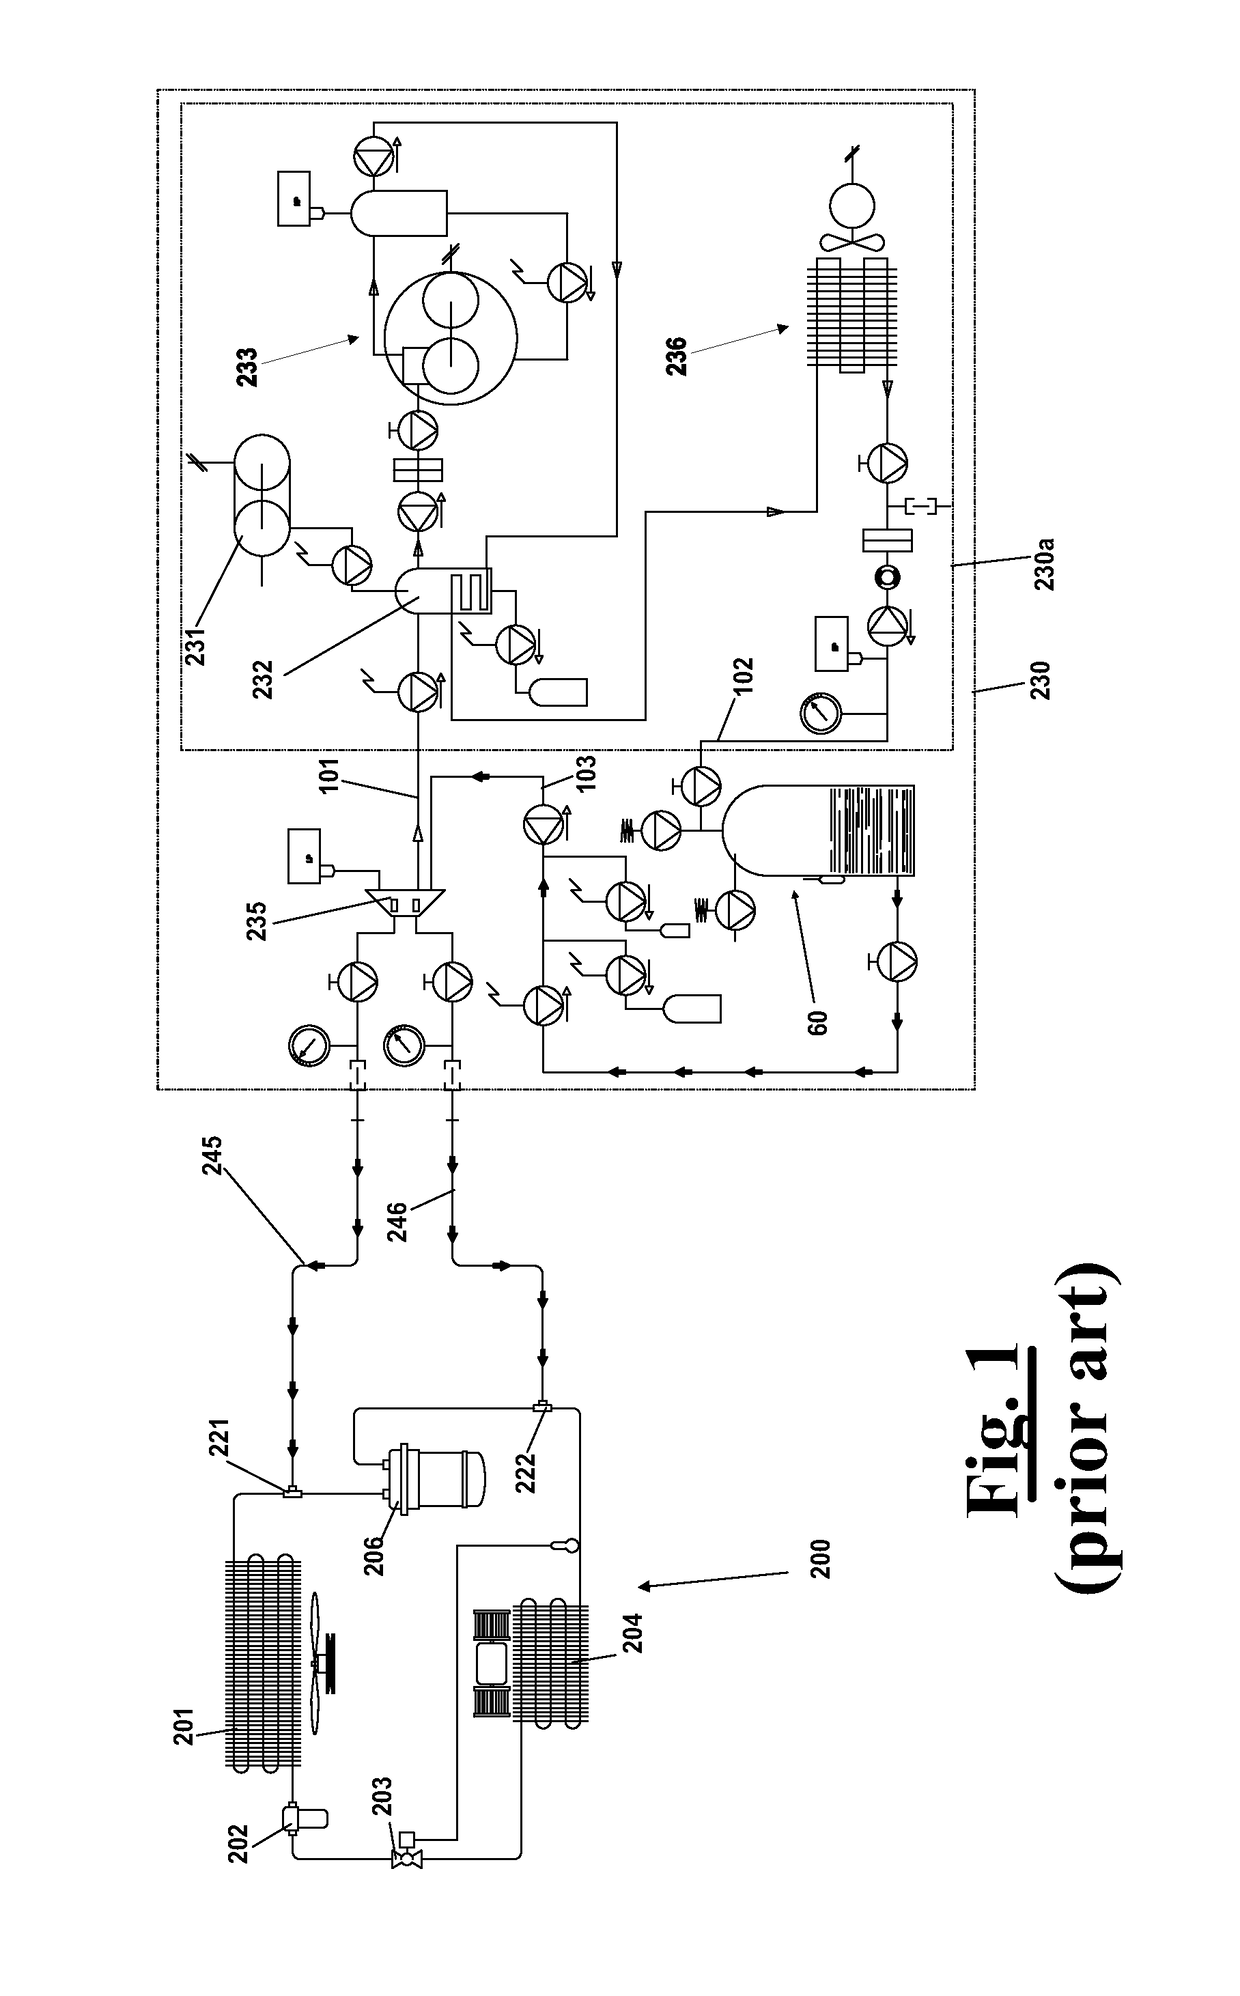 Apparatus and method for recovering and regenerating a refrigerant from an A/C plant